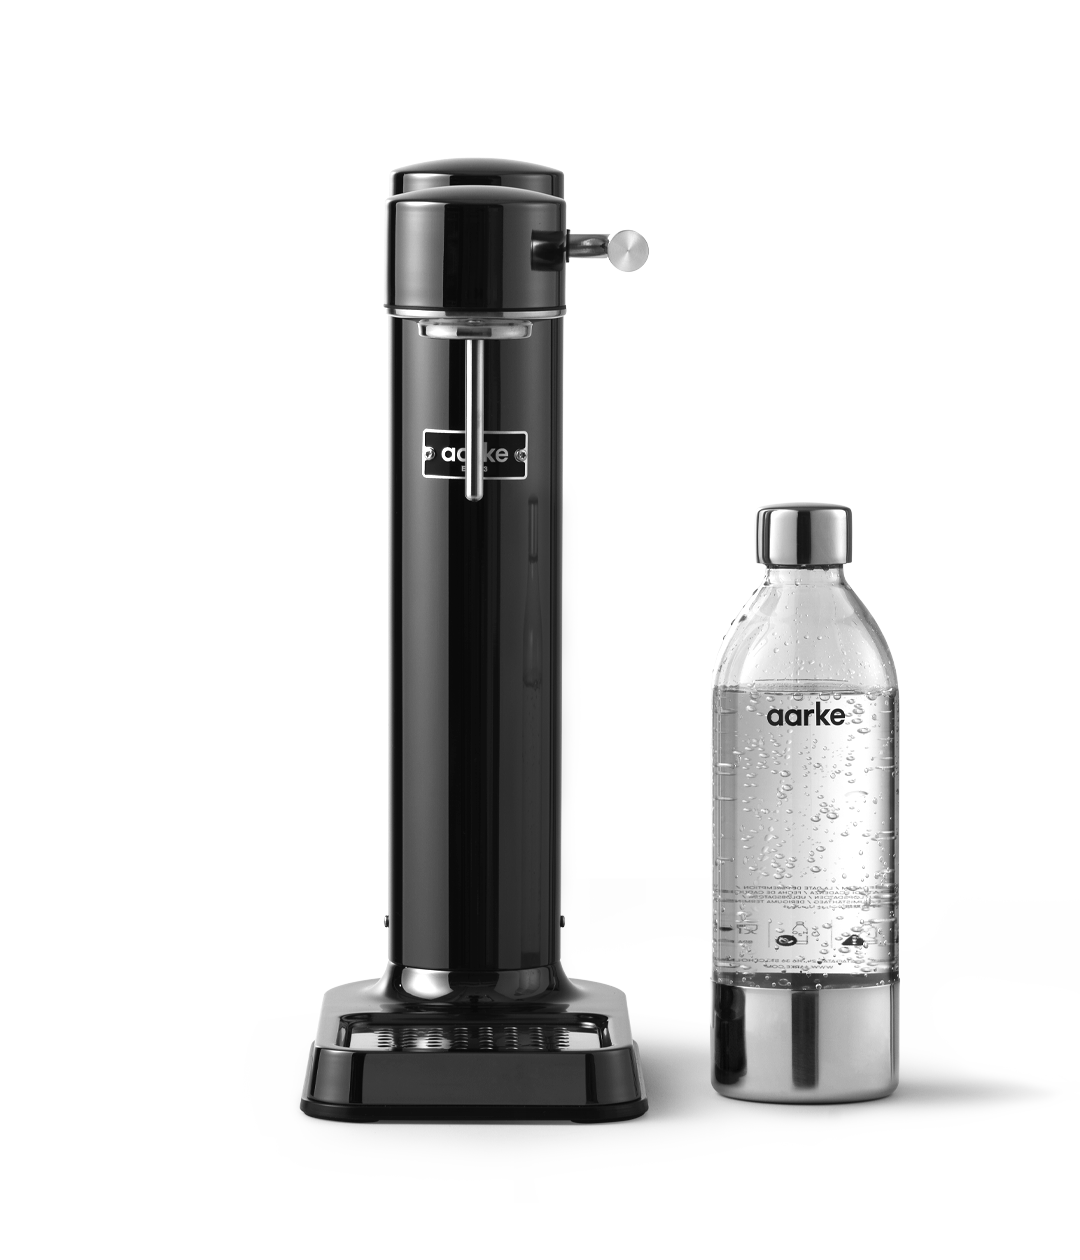 Aarke Carbonator 3 in Black Chrome. Front view with PET bottle.